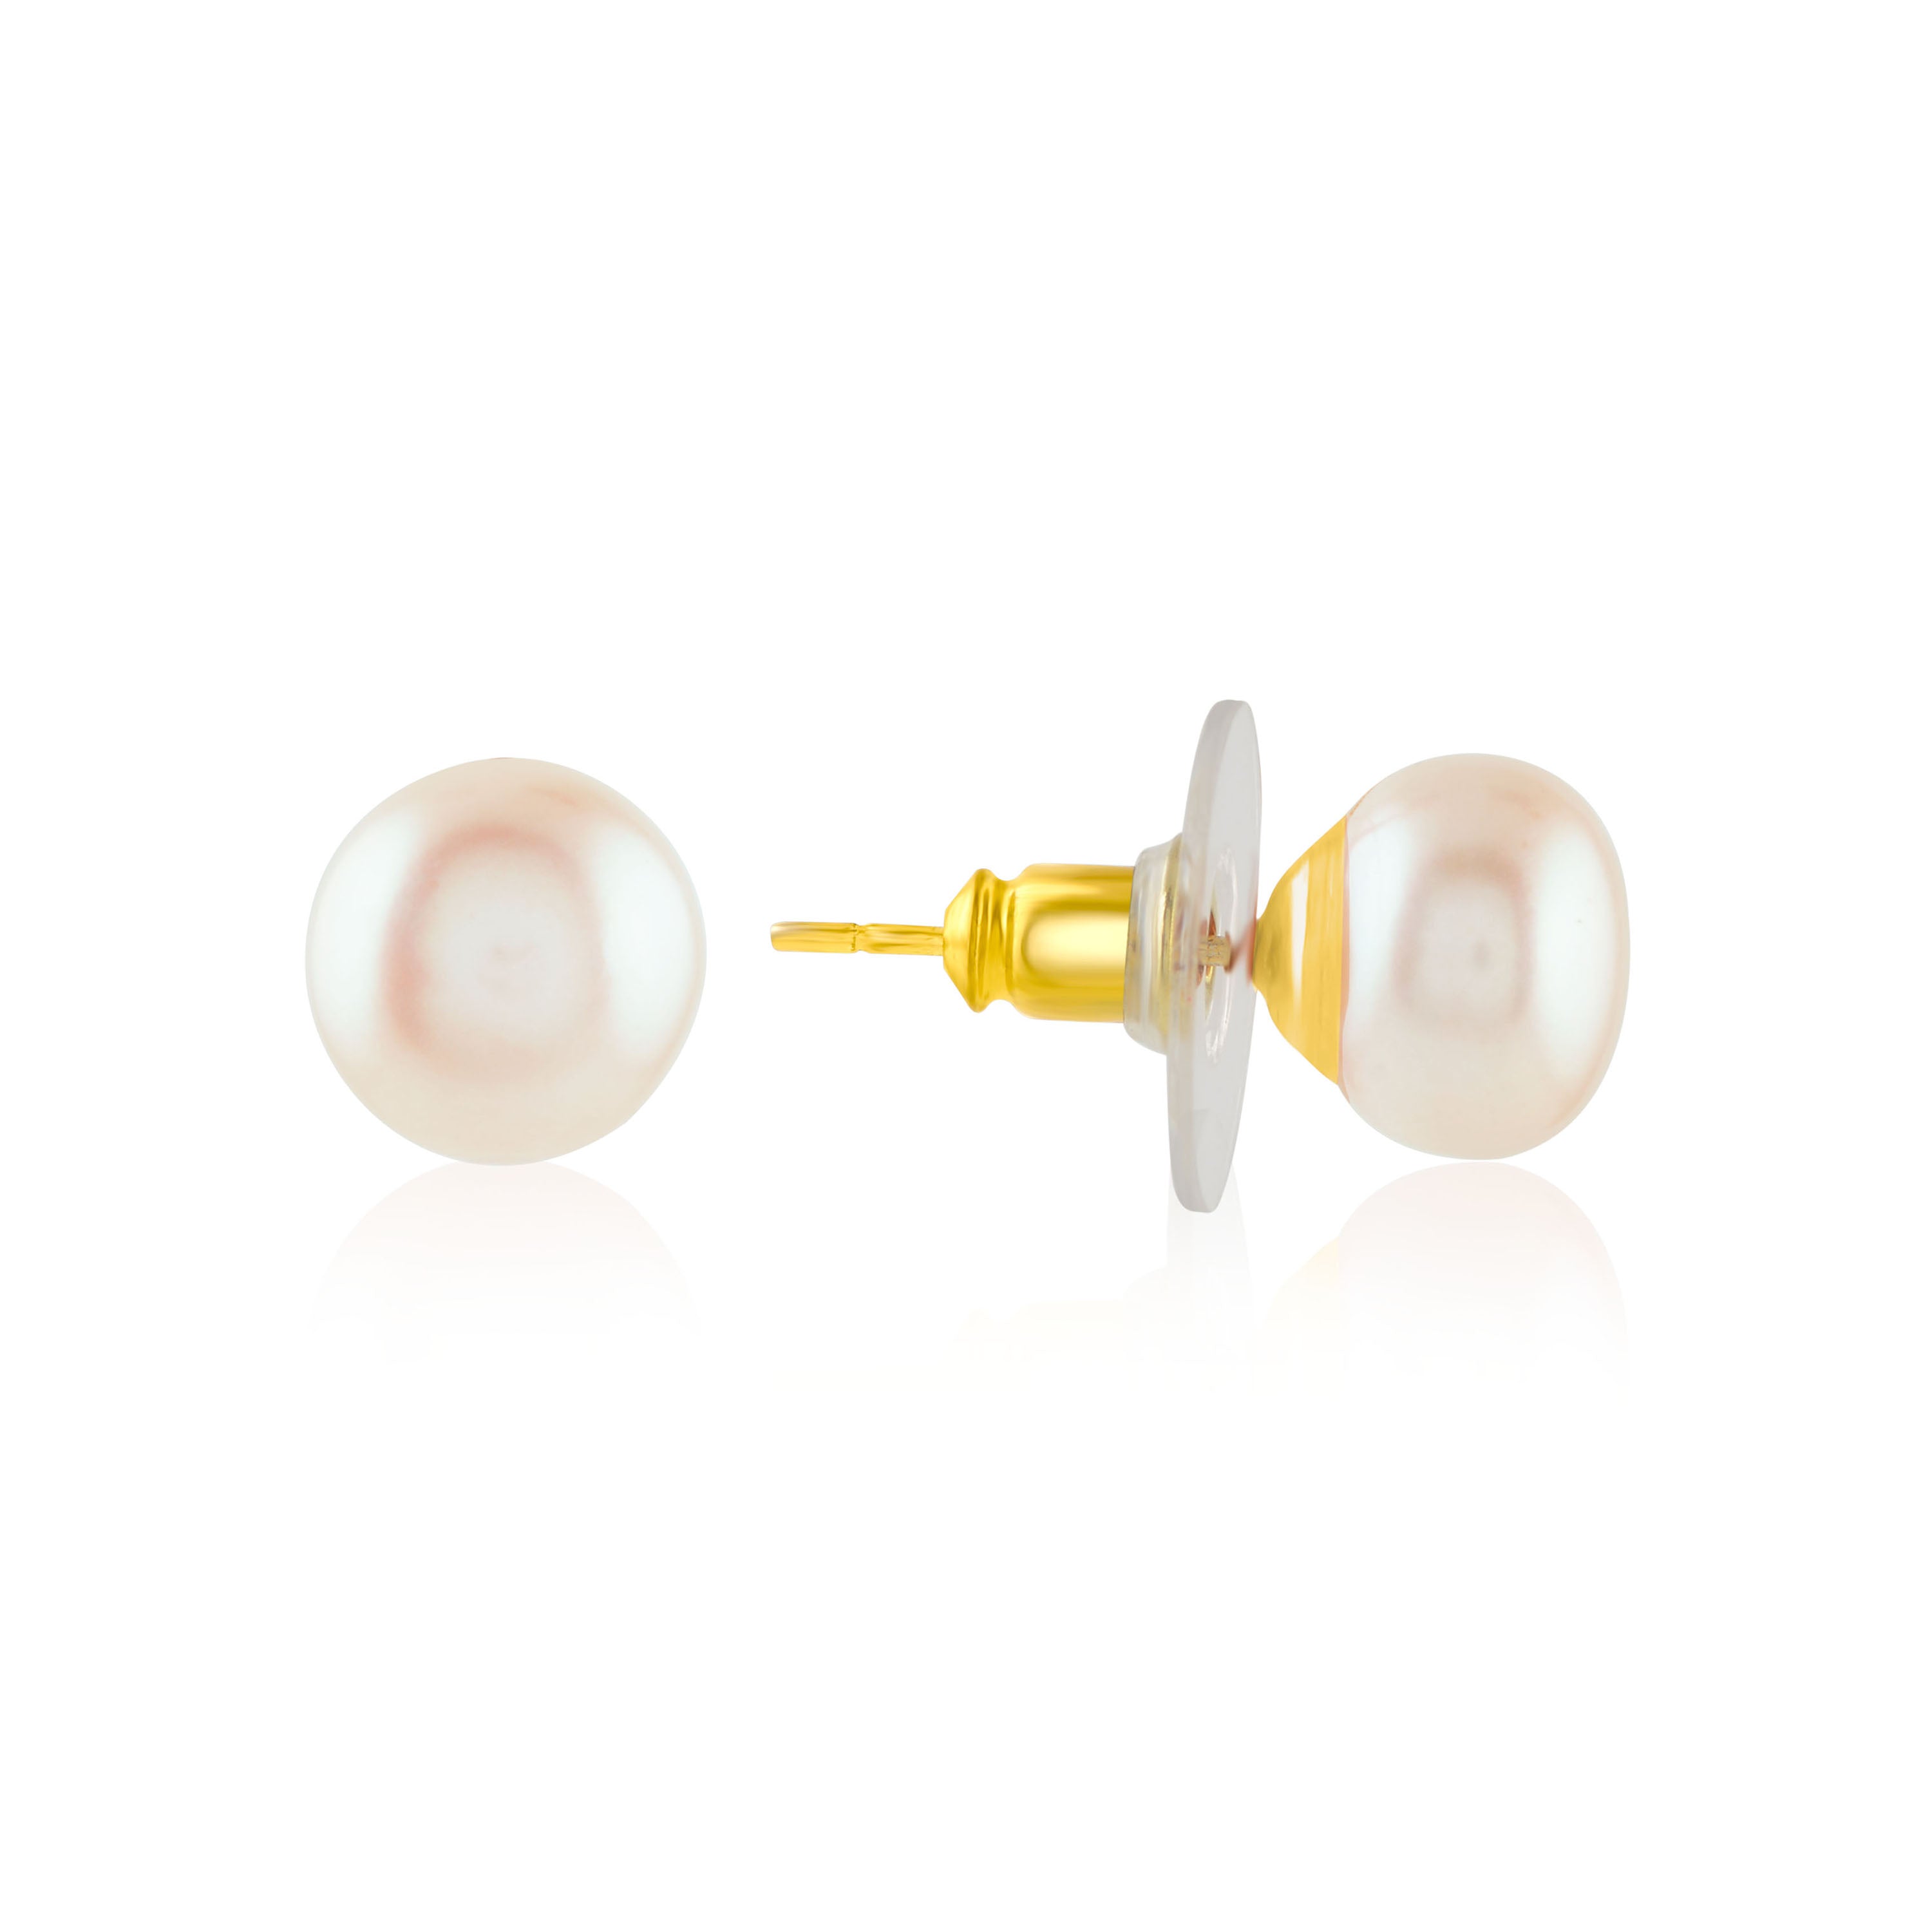 Classic Peach-colored Freshwater Pearls Studs Earrings